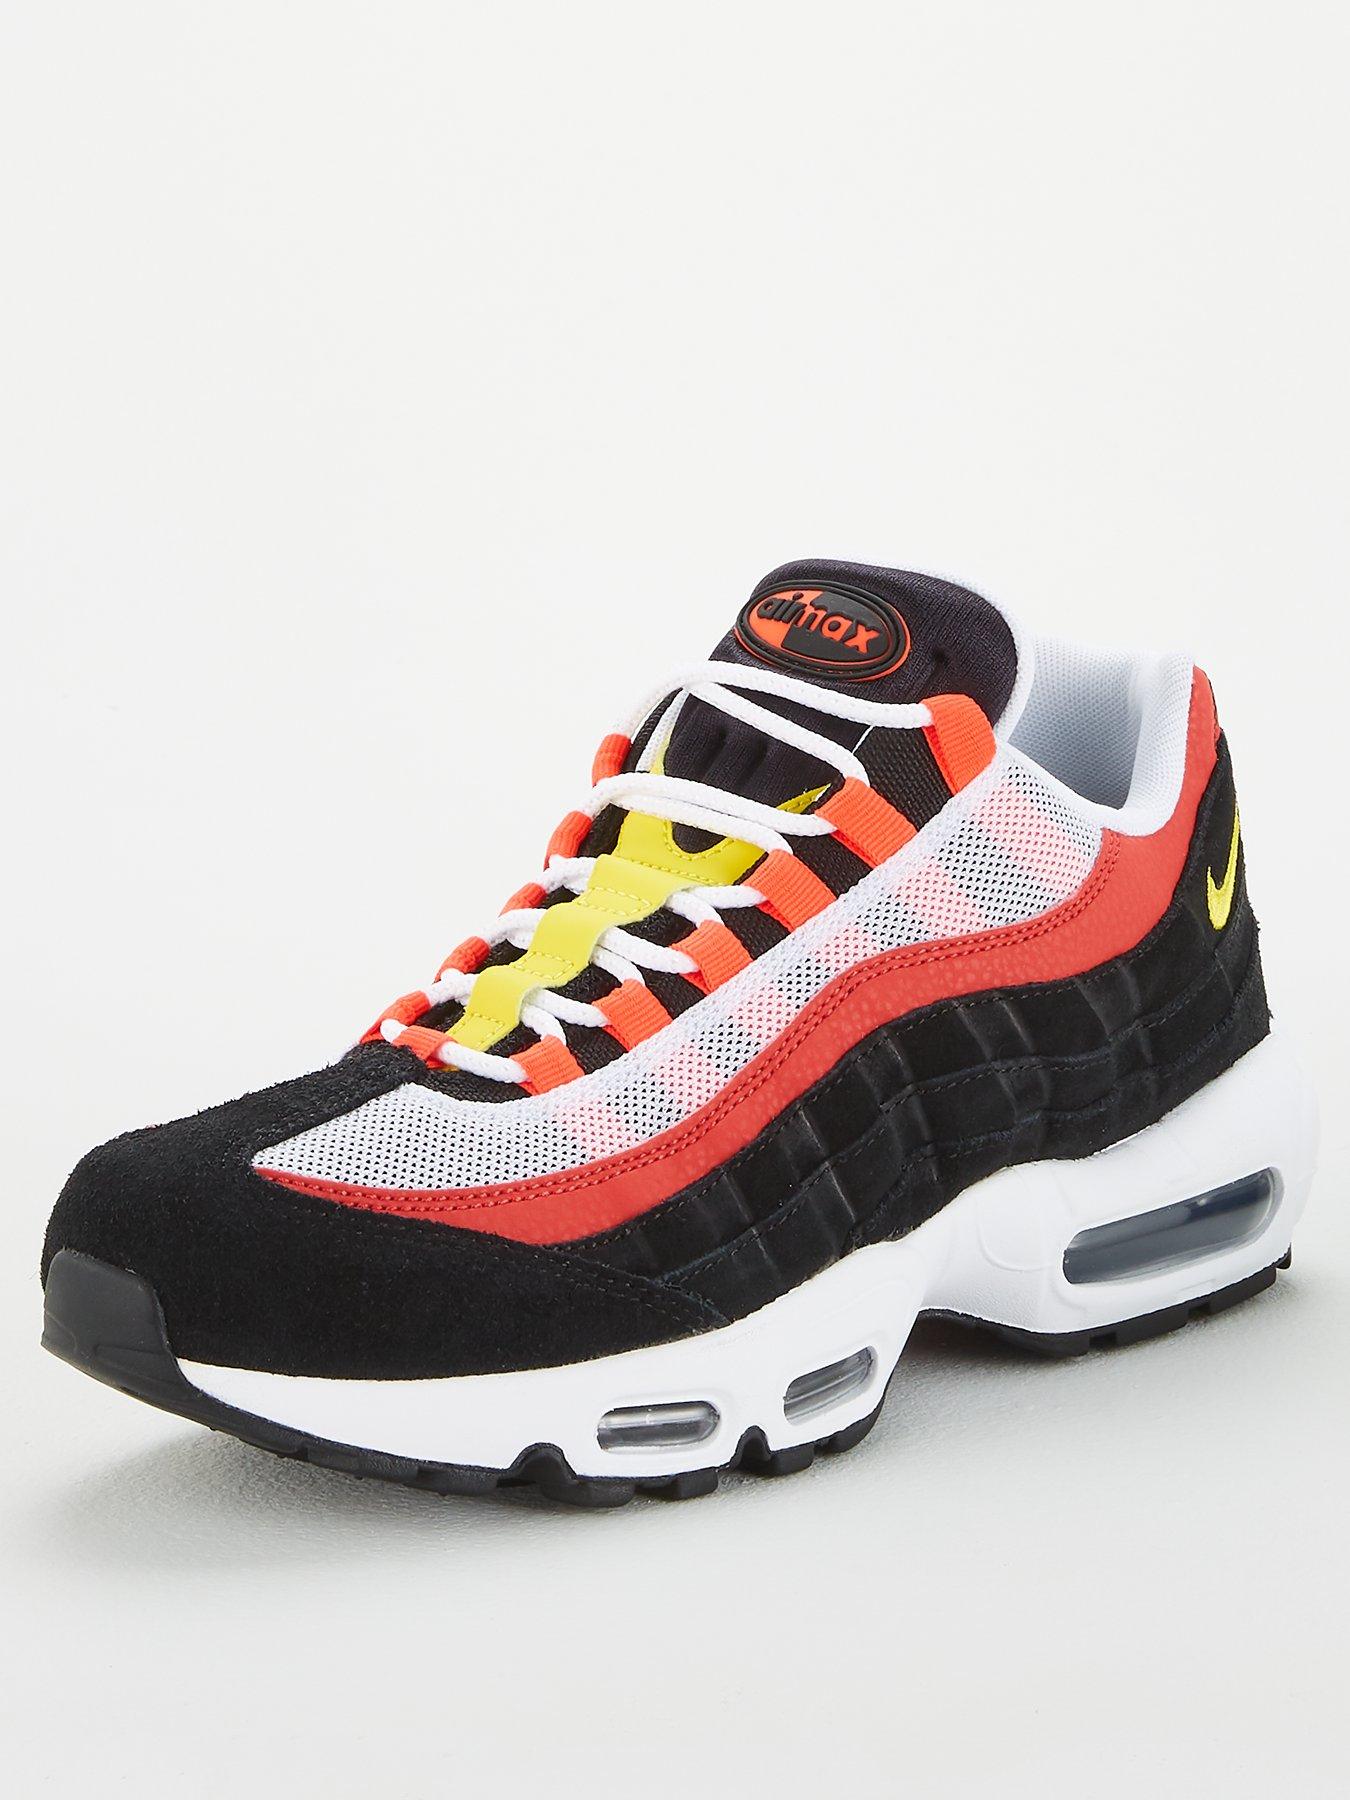 black red and white air max 95